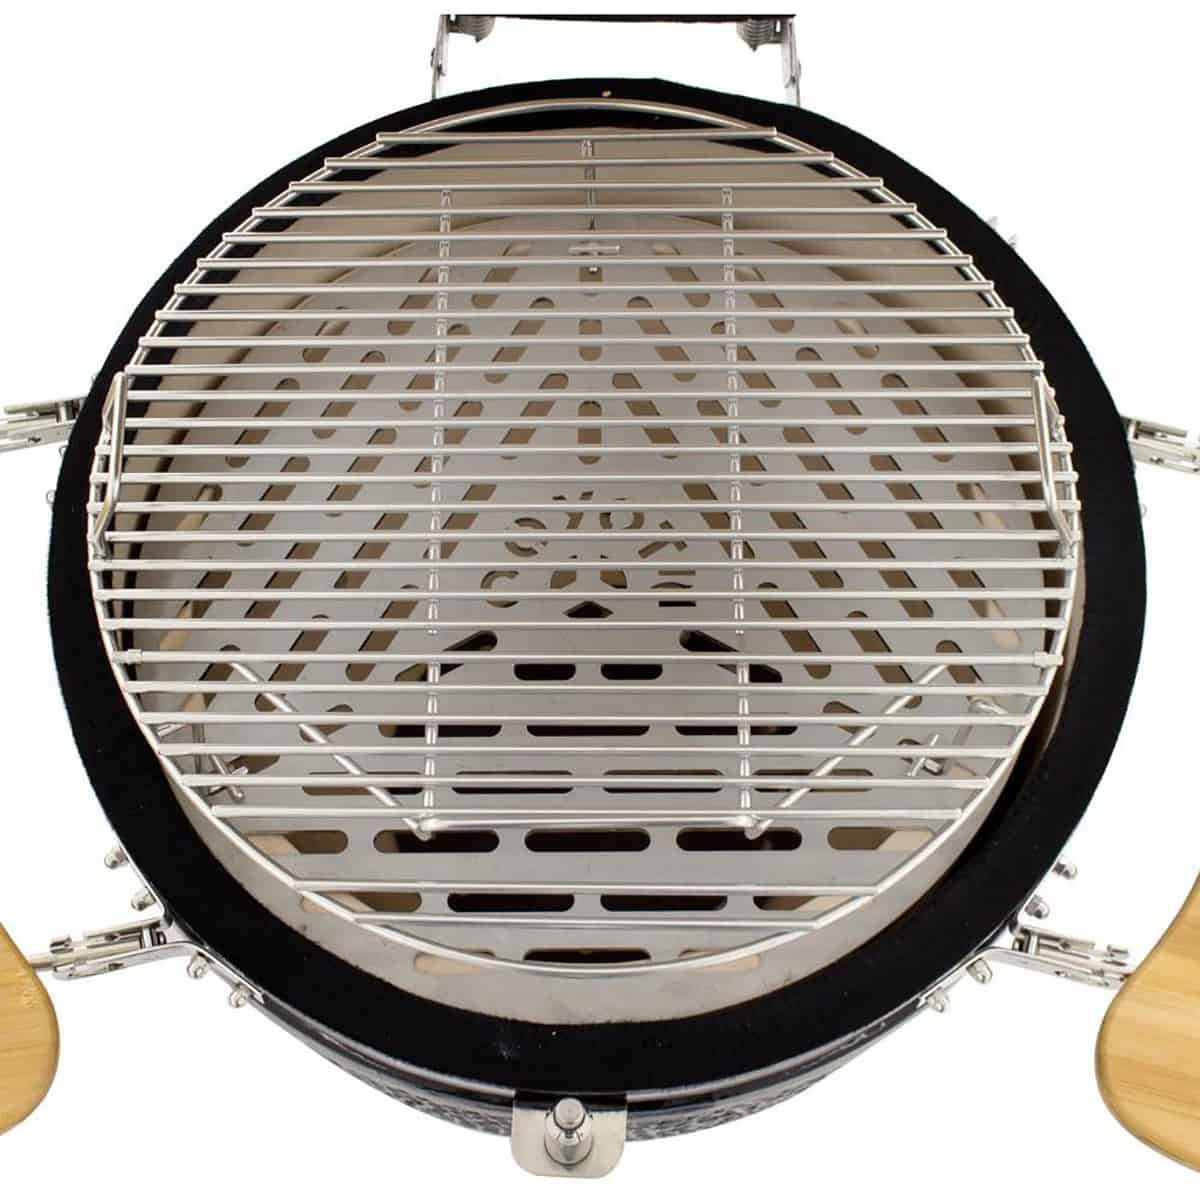 Coyote Asado Ceramic Grill and Smoker Grate Top View